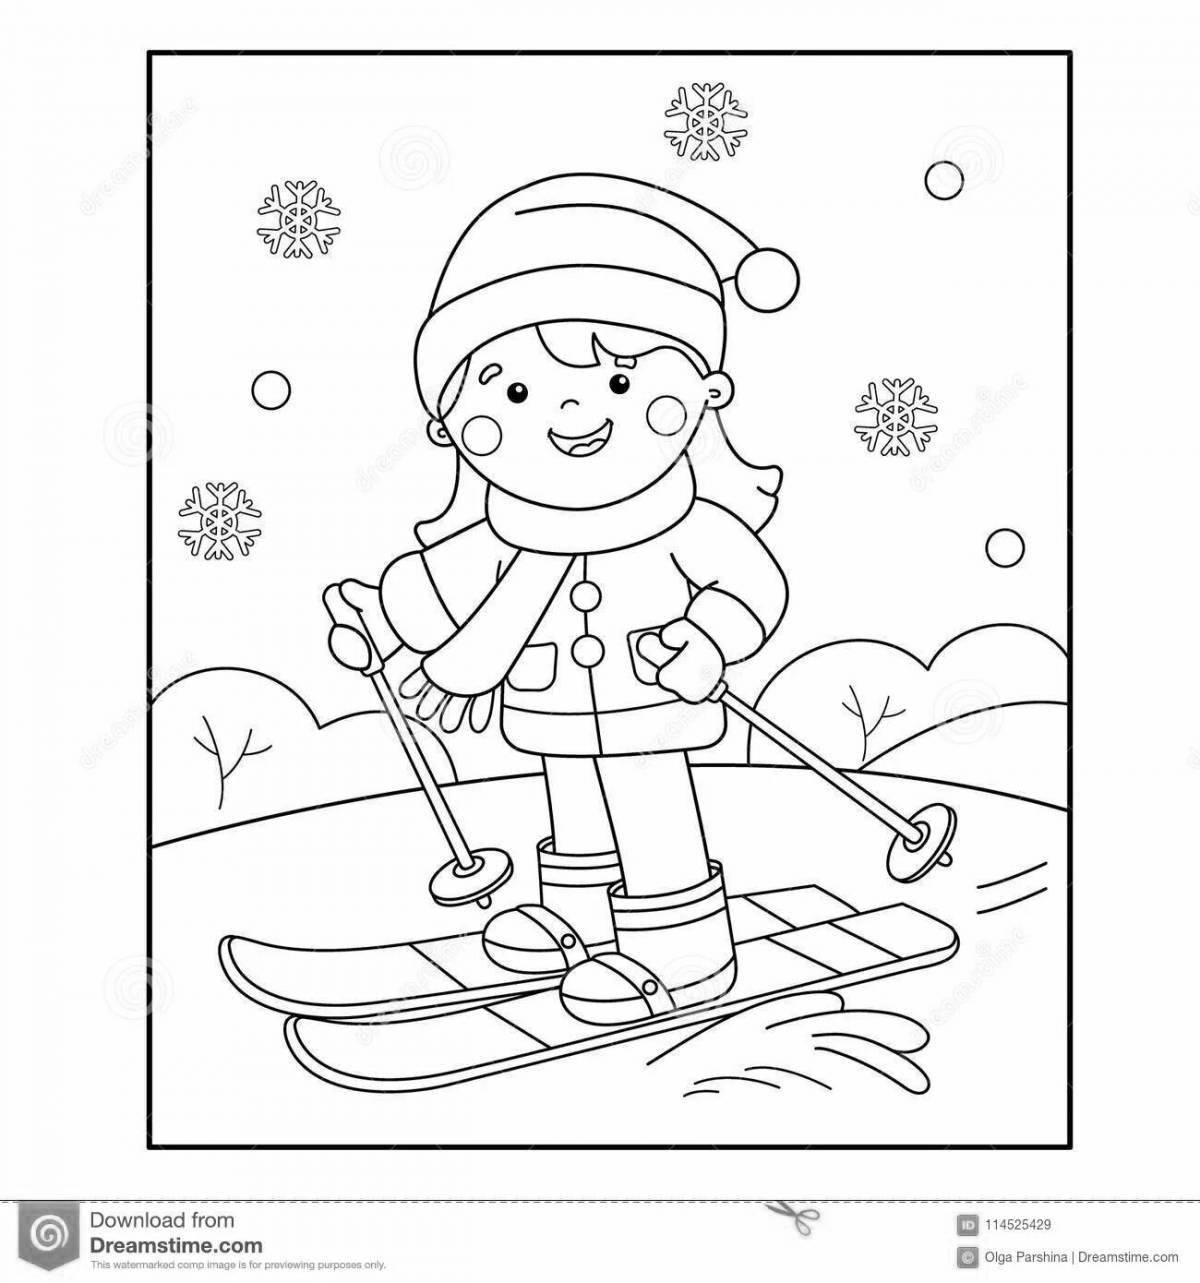 Sparkling ski coloring for minors